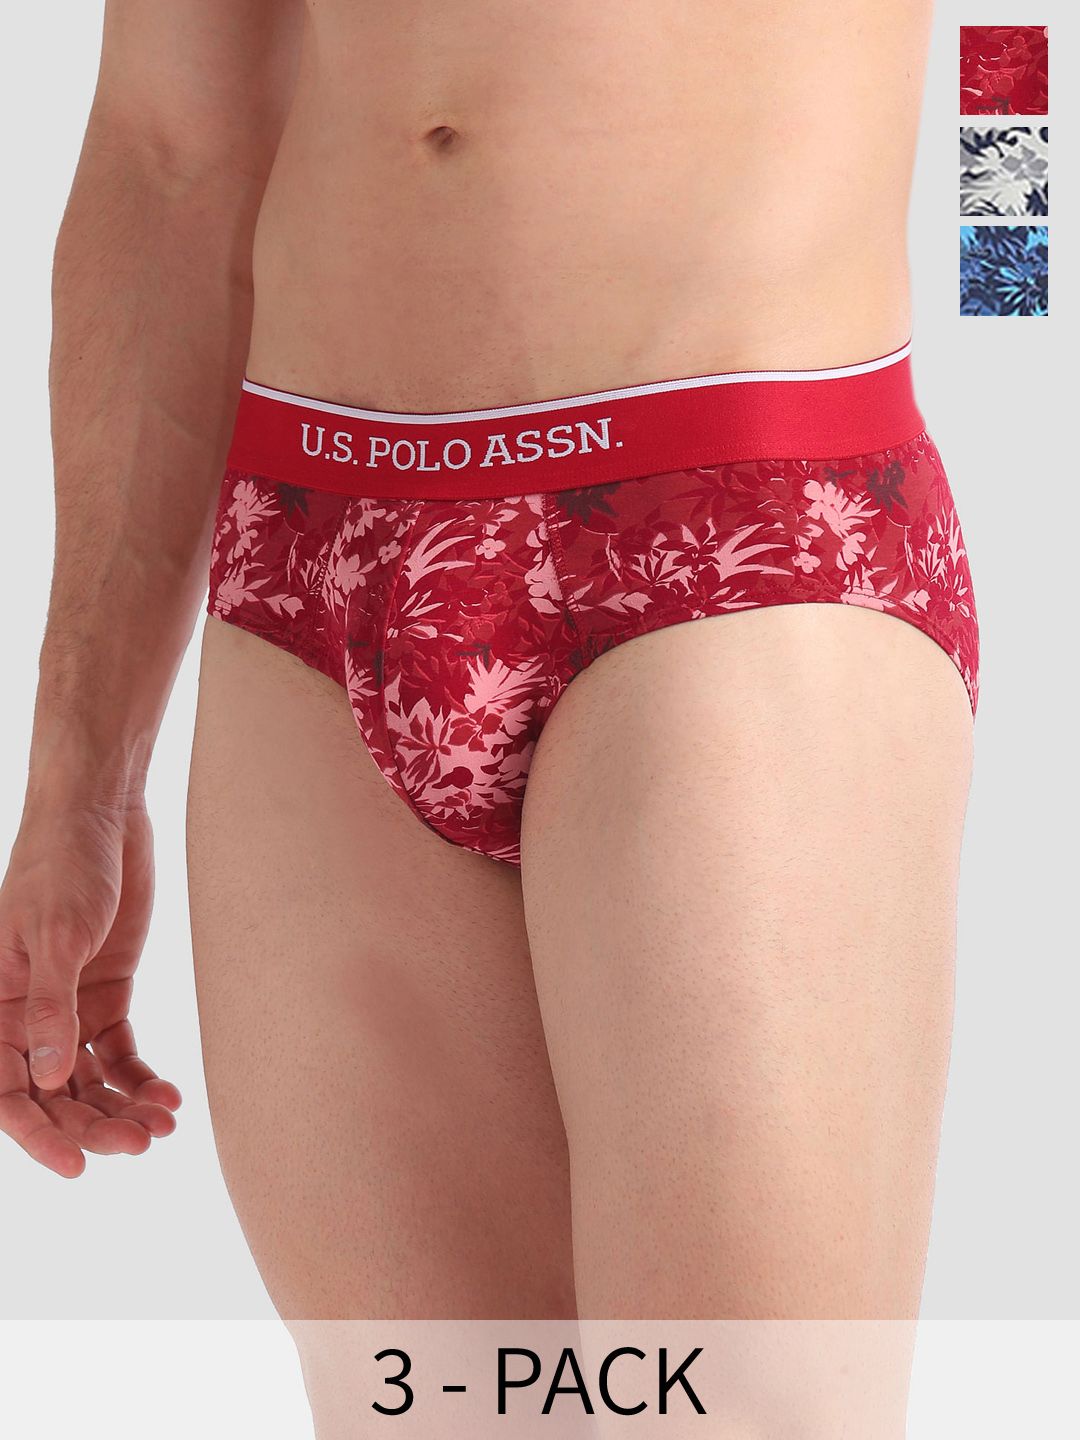 U.S. Polo Assn. Men Pack Of 3 Floral Printed Anti-Bacterial Basic Briefs OEB01-BRG-P3